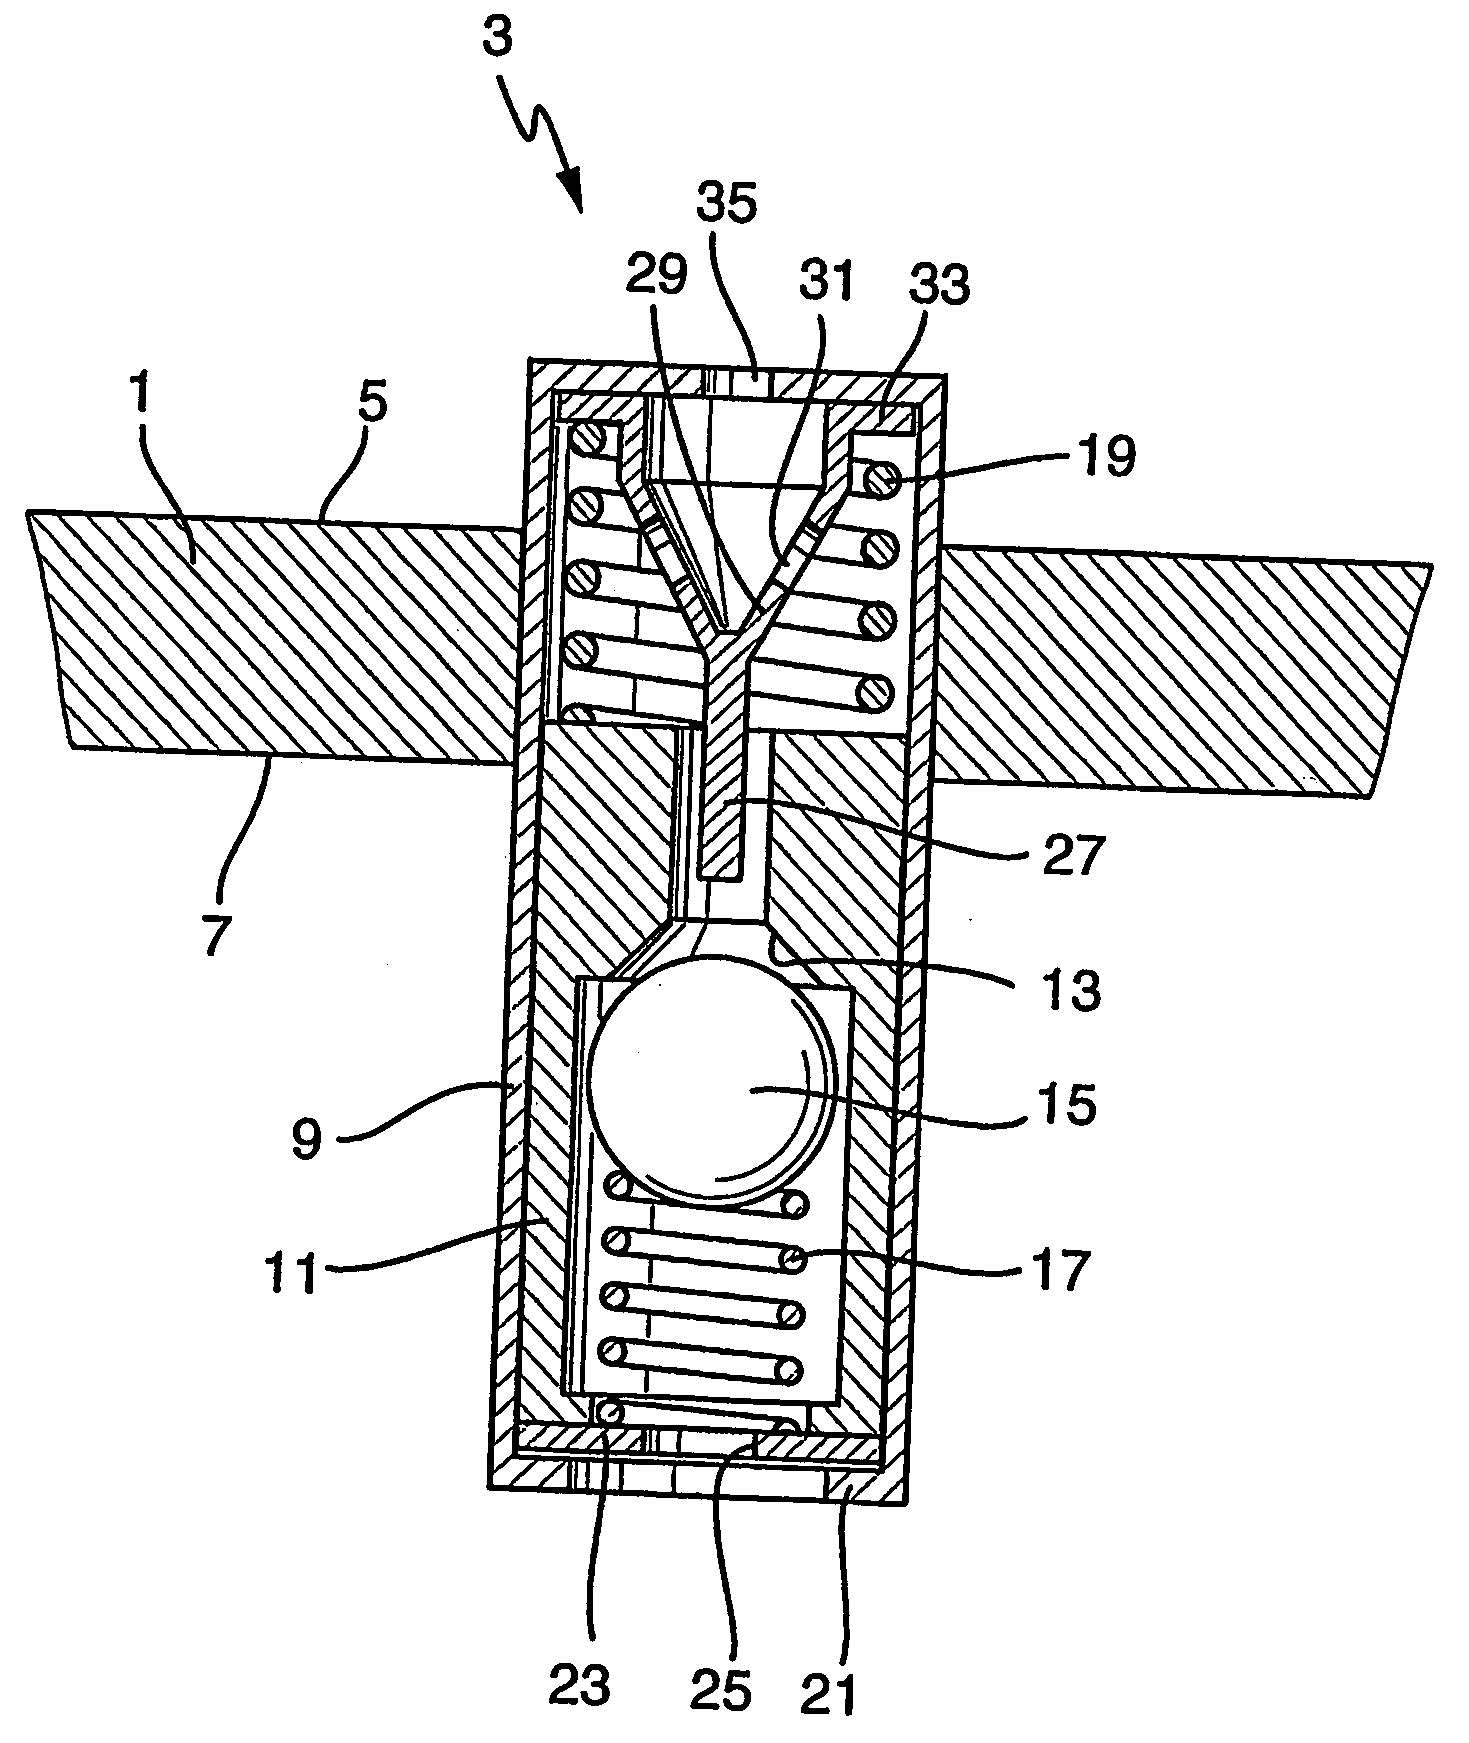 Hydraulic power steering system with charging valve and air cushion in the tank